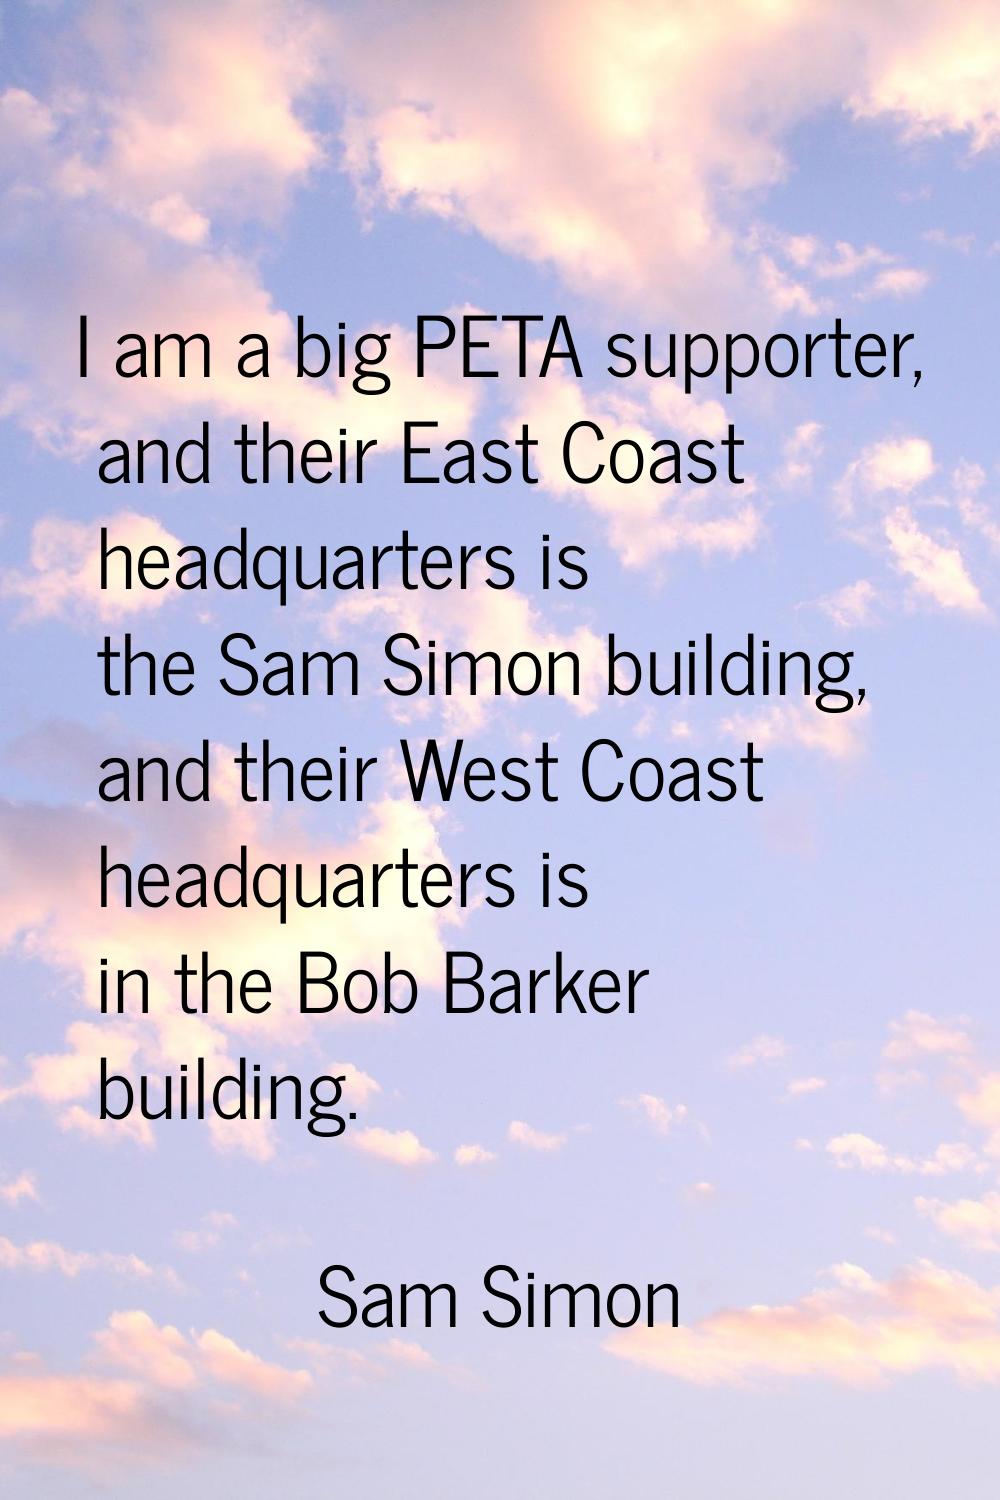 I am a big PETA supporter, and their East Coast headquarters is the Sam Simon building, and their W